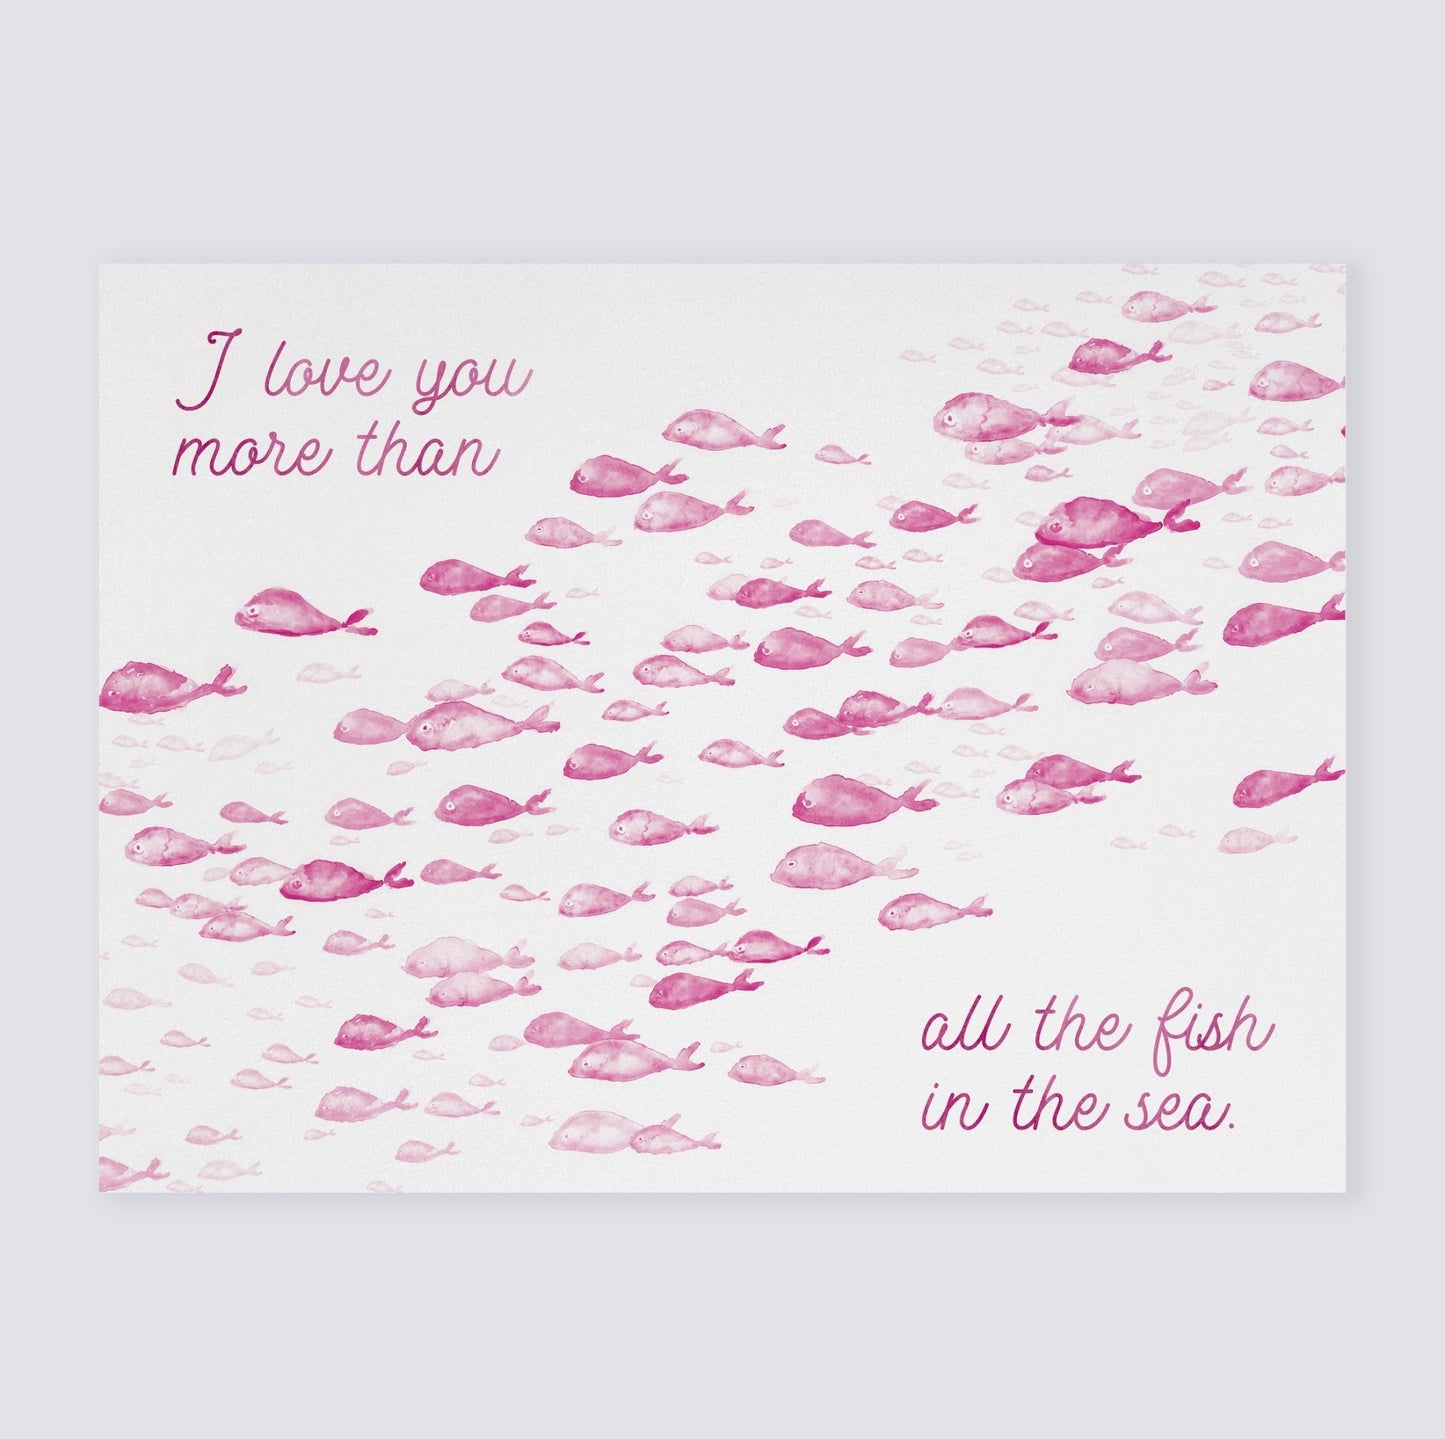 Love You More Than All The Fish in the Sea 1 Print - Art Prints - Moon Rock Prints